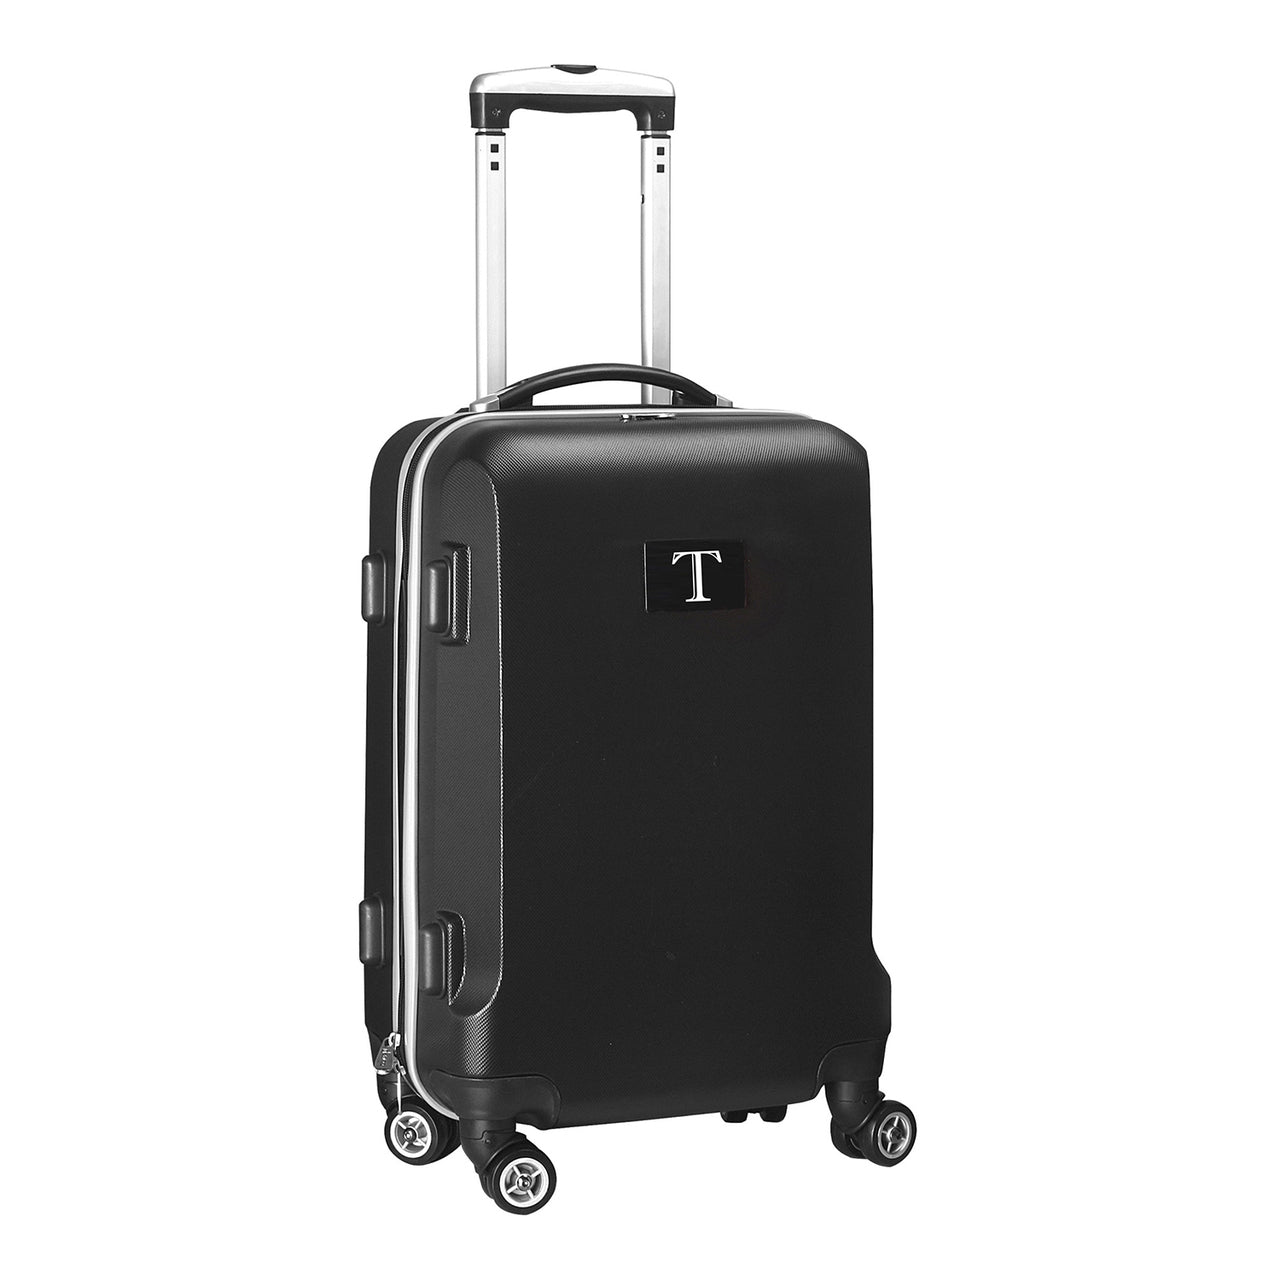 Personalized Initial Name letter "T" 20 inches Carry on Hardcase Spinner Luggage by Mojo in BLACK